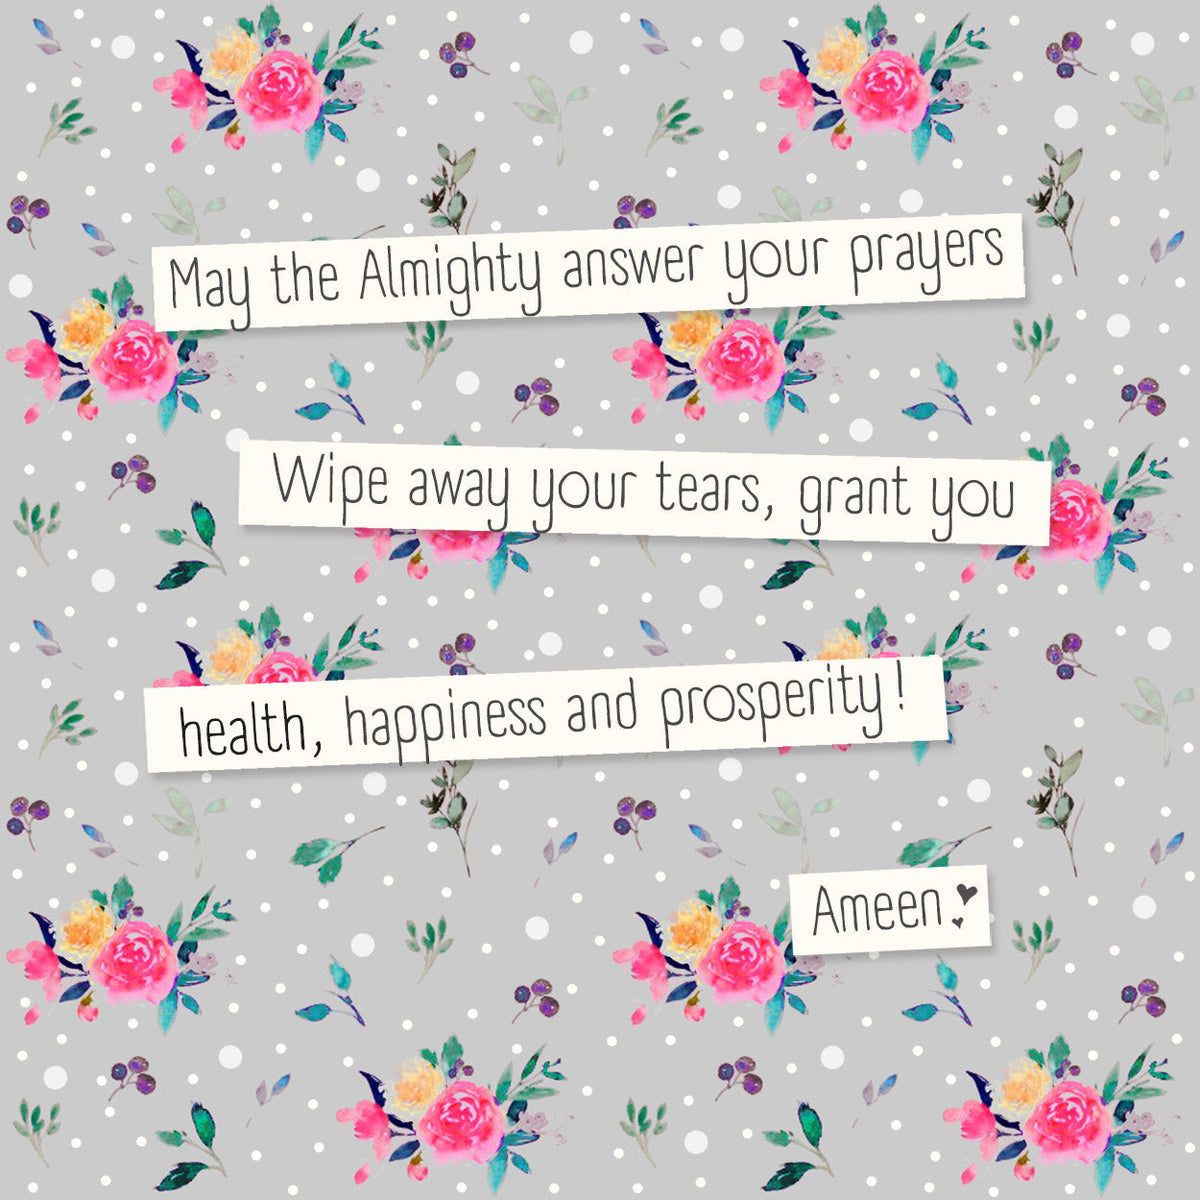 May the Almighty answer your prayers